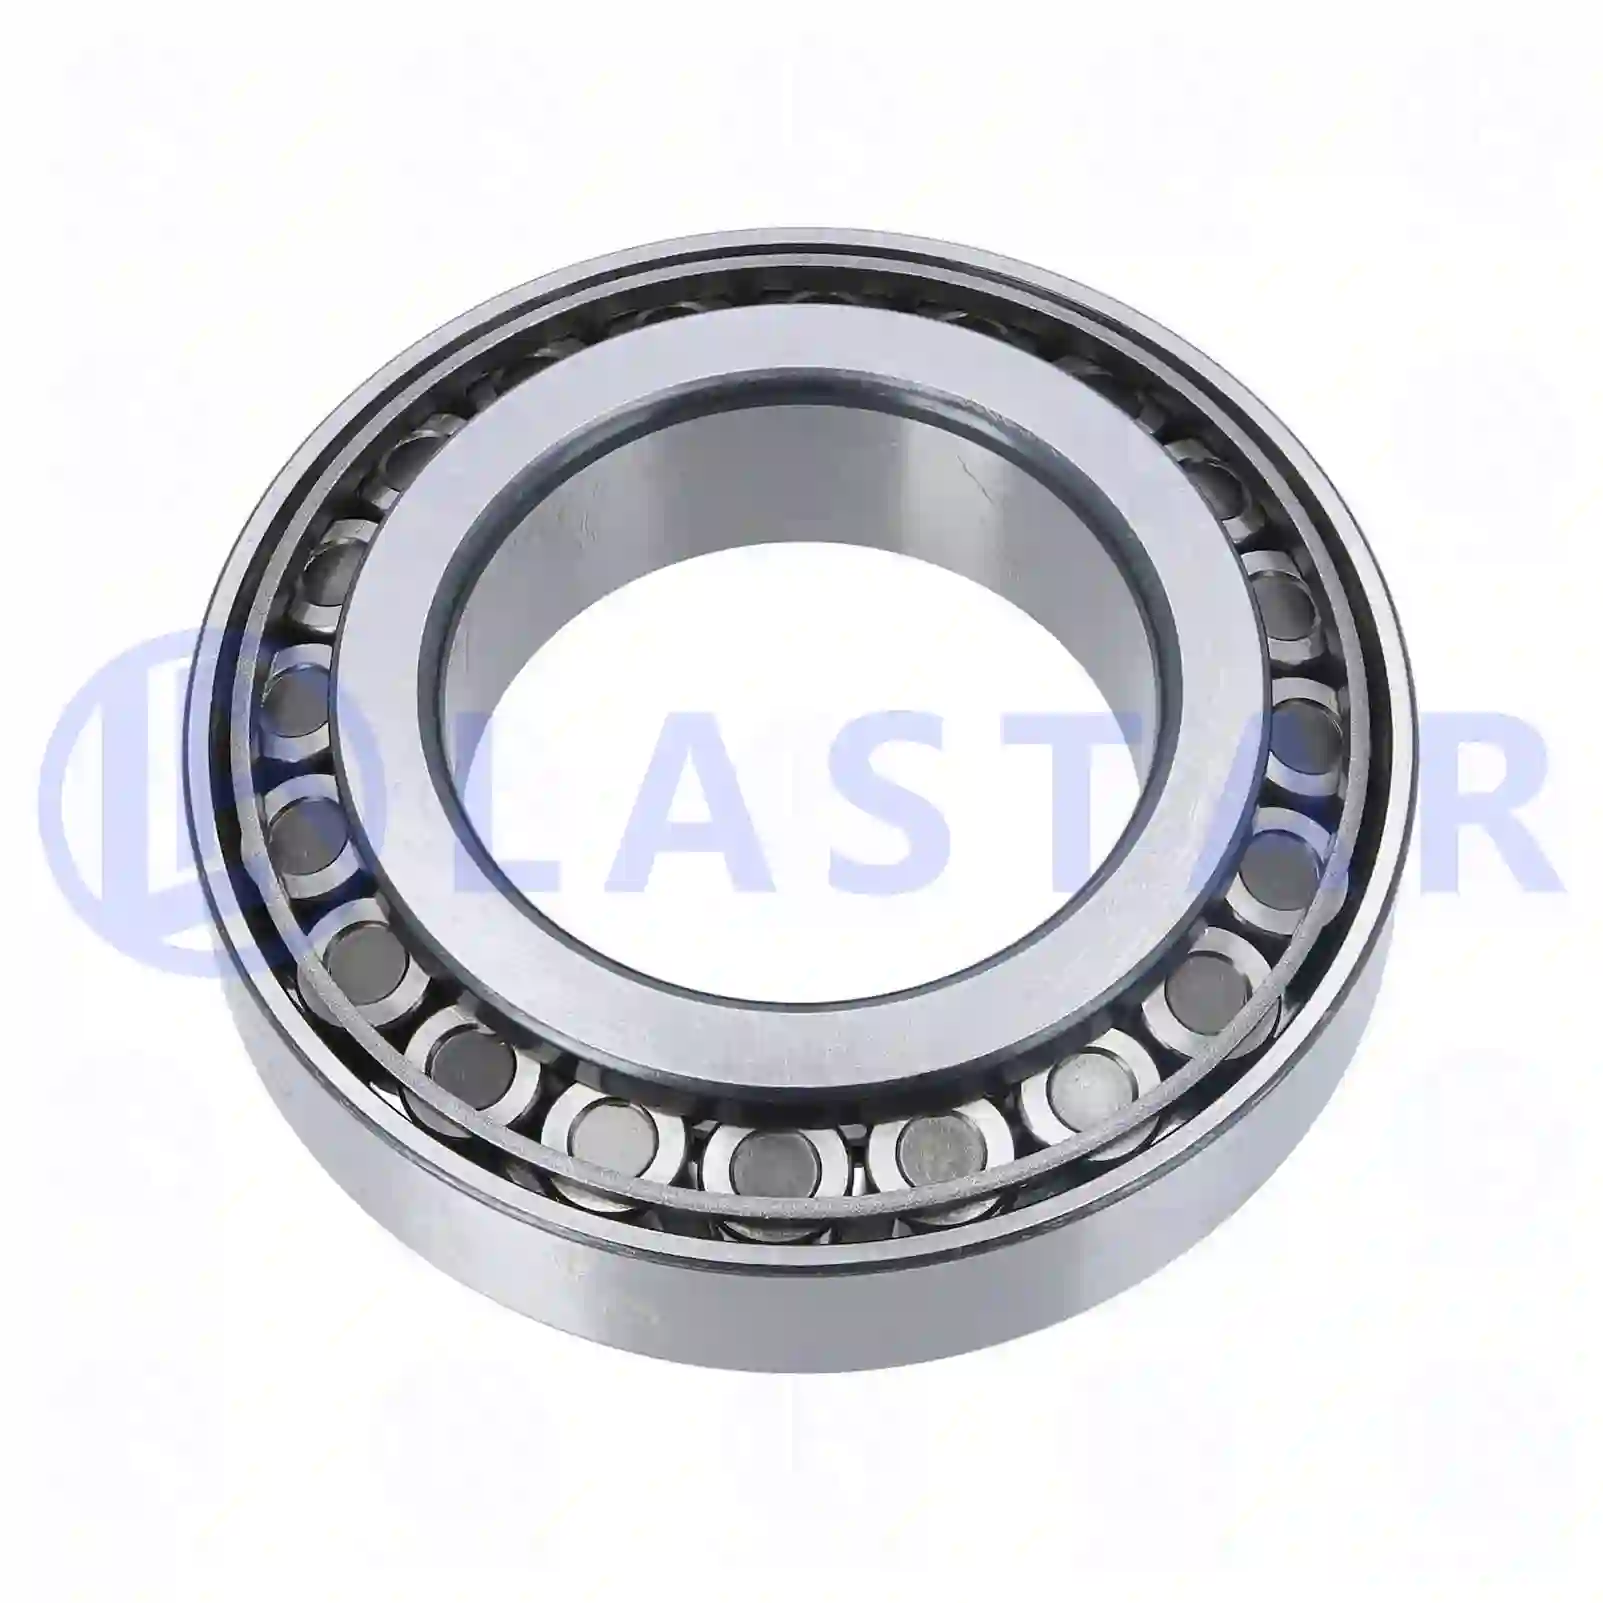 Bearings Tapered roller bearing, la no: 77724889 ,  oem no:6387761, 94036568, 94050705, 94060941, 1-09812048-0, 1-09812145-0, 1-09812146-0, 1-09812151-0, 1-09812167-0, 9-00093032-0, 26800220, 3612948000, 06324990006, 0009810305, 0009812401, 0009817205, 0009819405, 000720032216, 0069810605, 38324-90000, 0959232216, 0959532216, 14103, 6691159000, 11067 Lastar Spare Part | Truck Spare Parts, Auotomotive Spare Parts